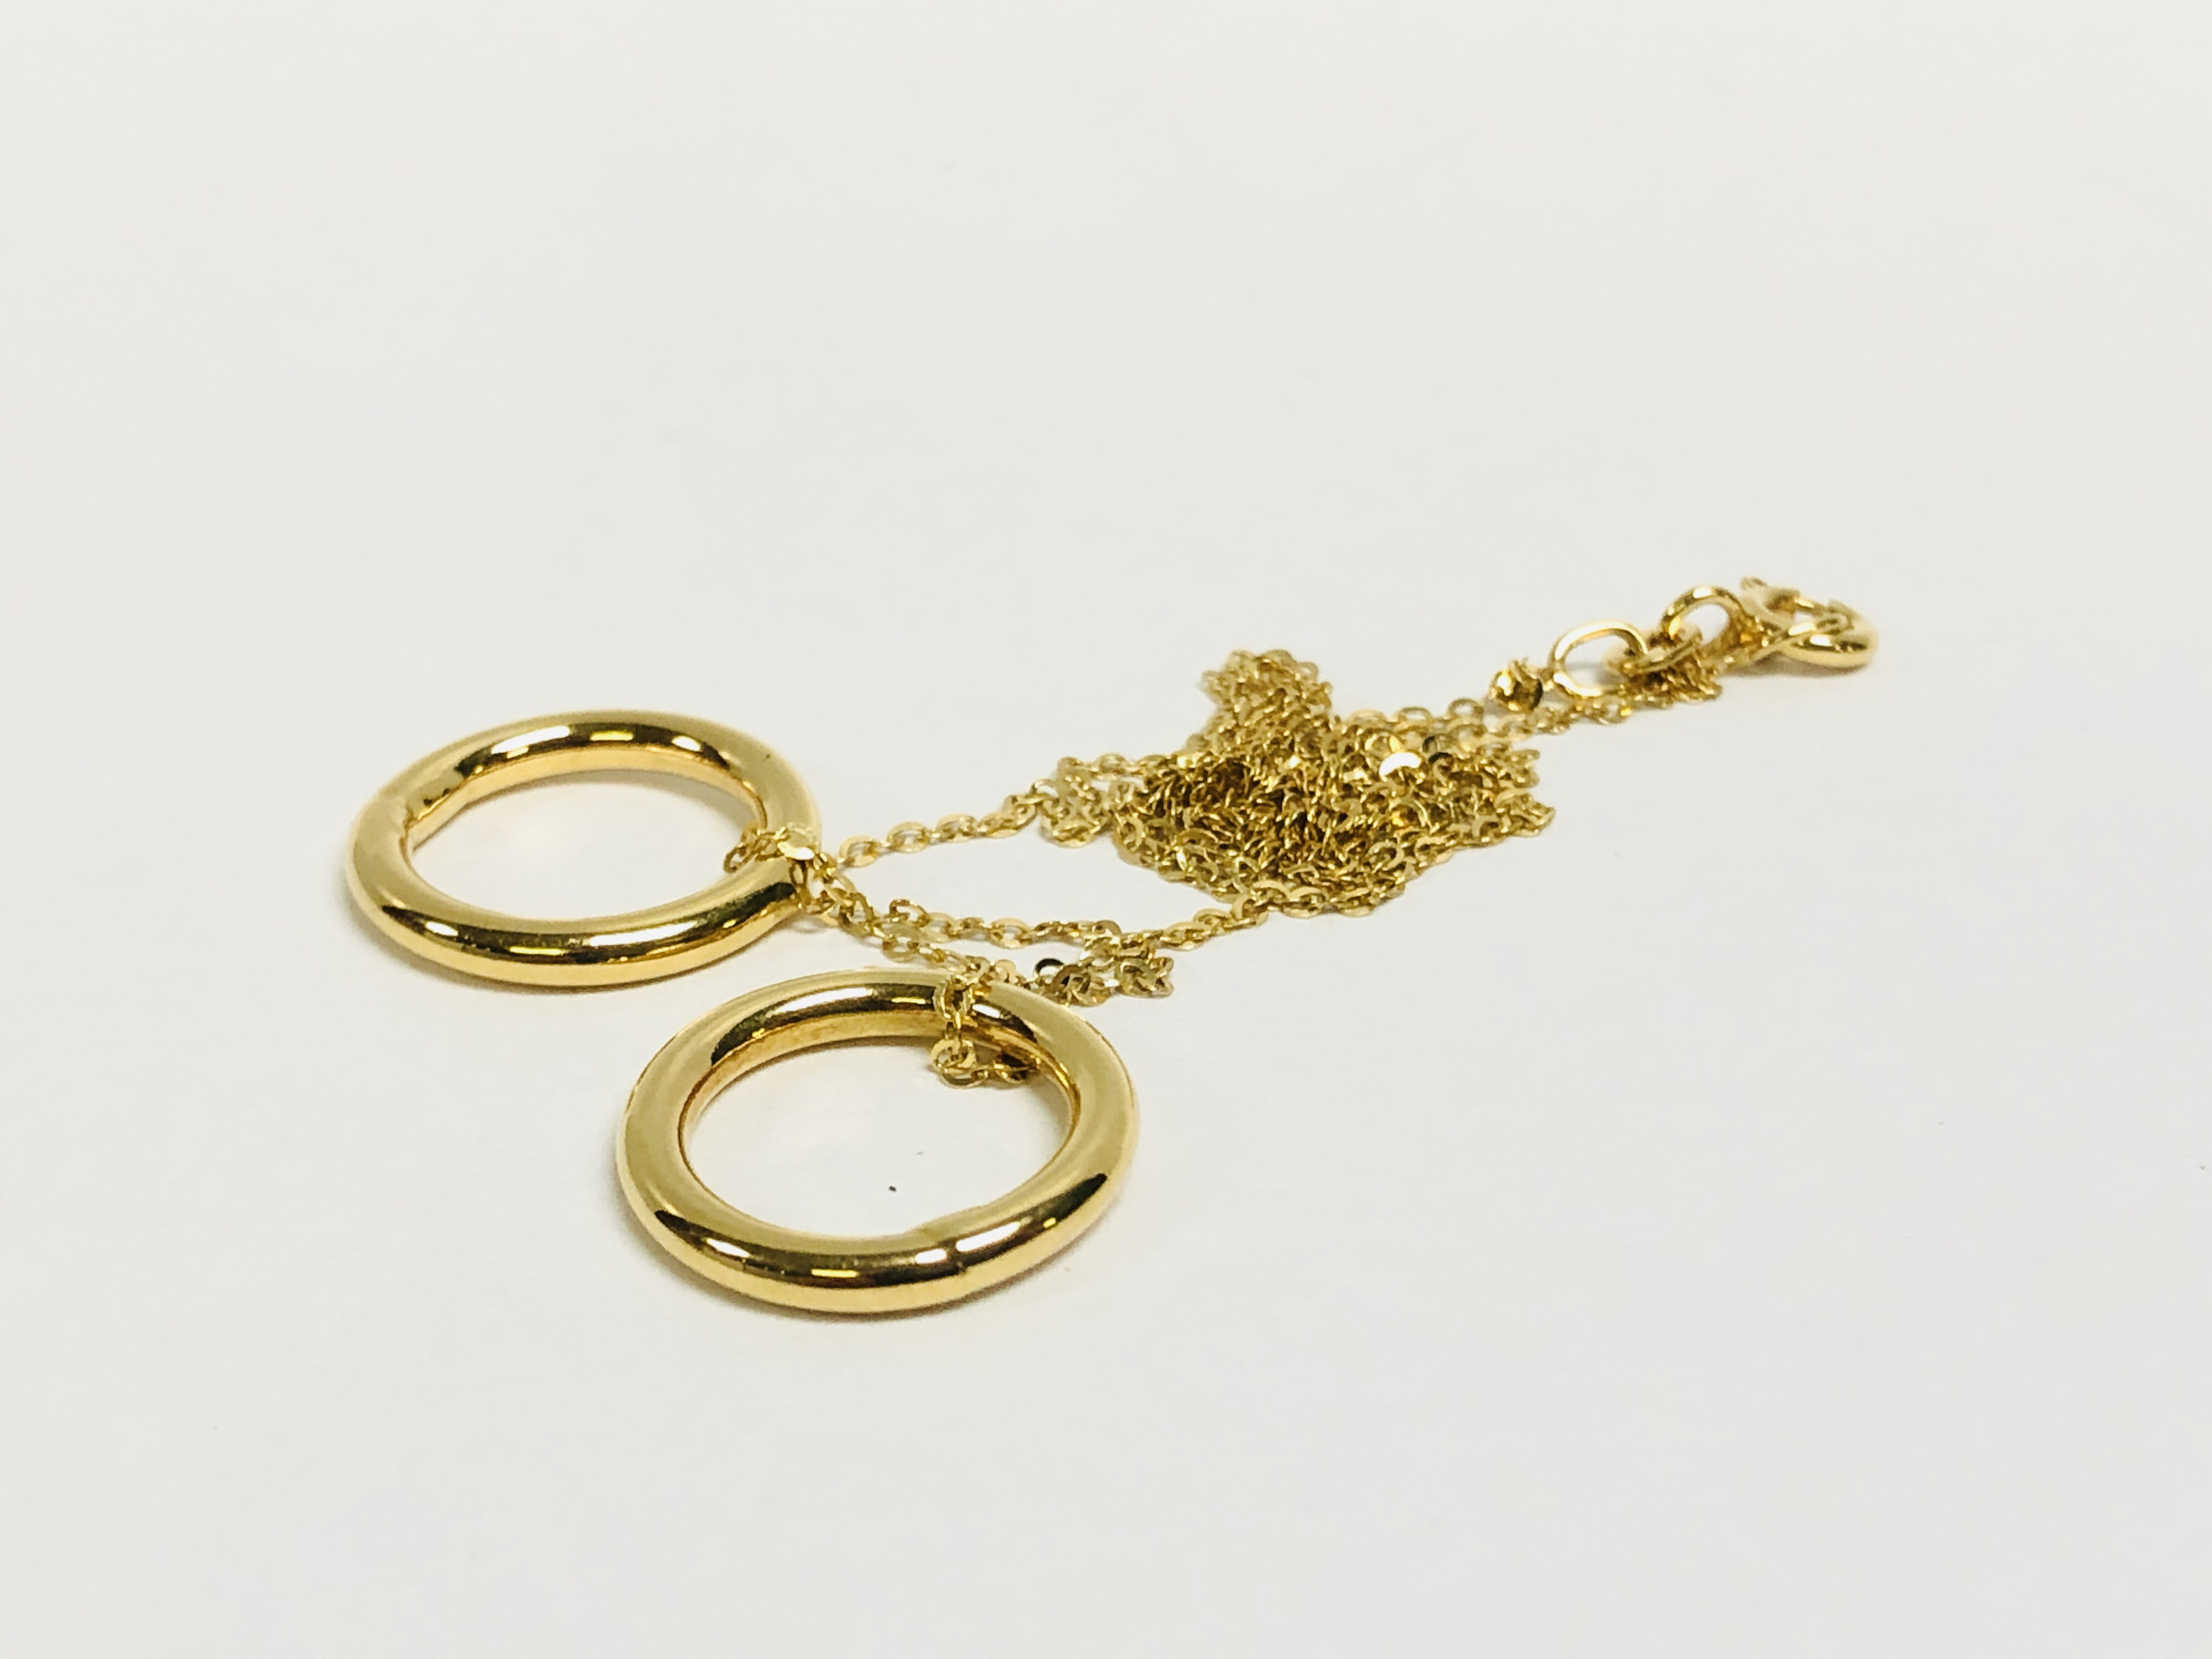 FINE DESIGNER NECKLACE MARKED 585 WITH TWO HOOP DROPS - Image 4 of 6